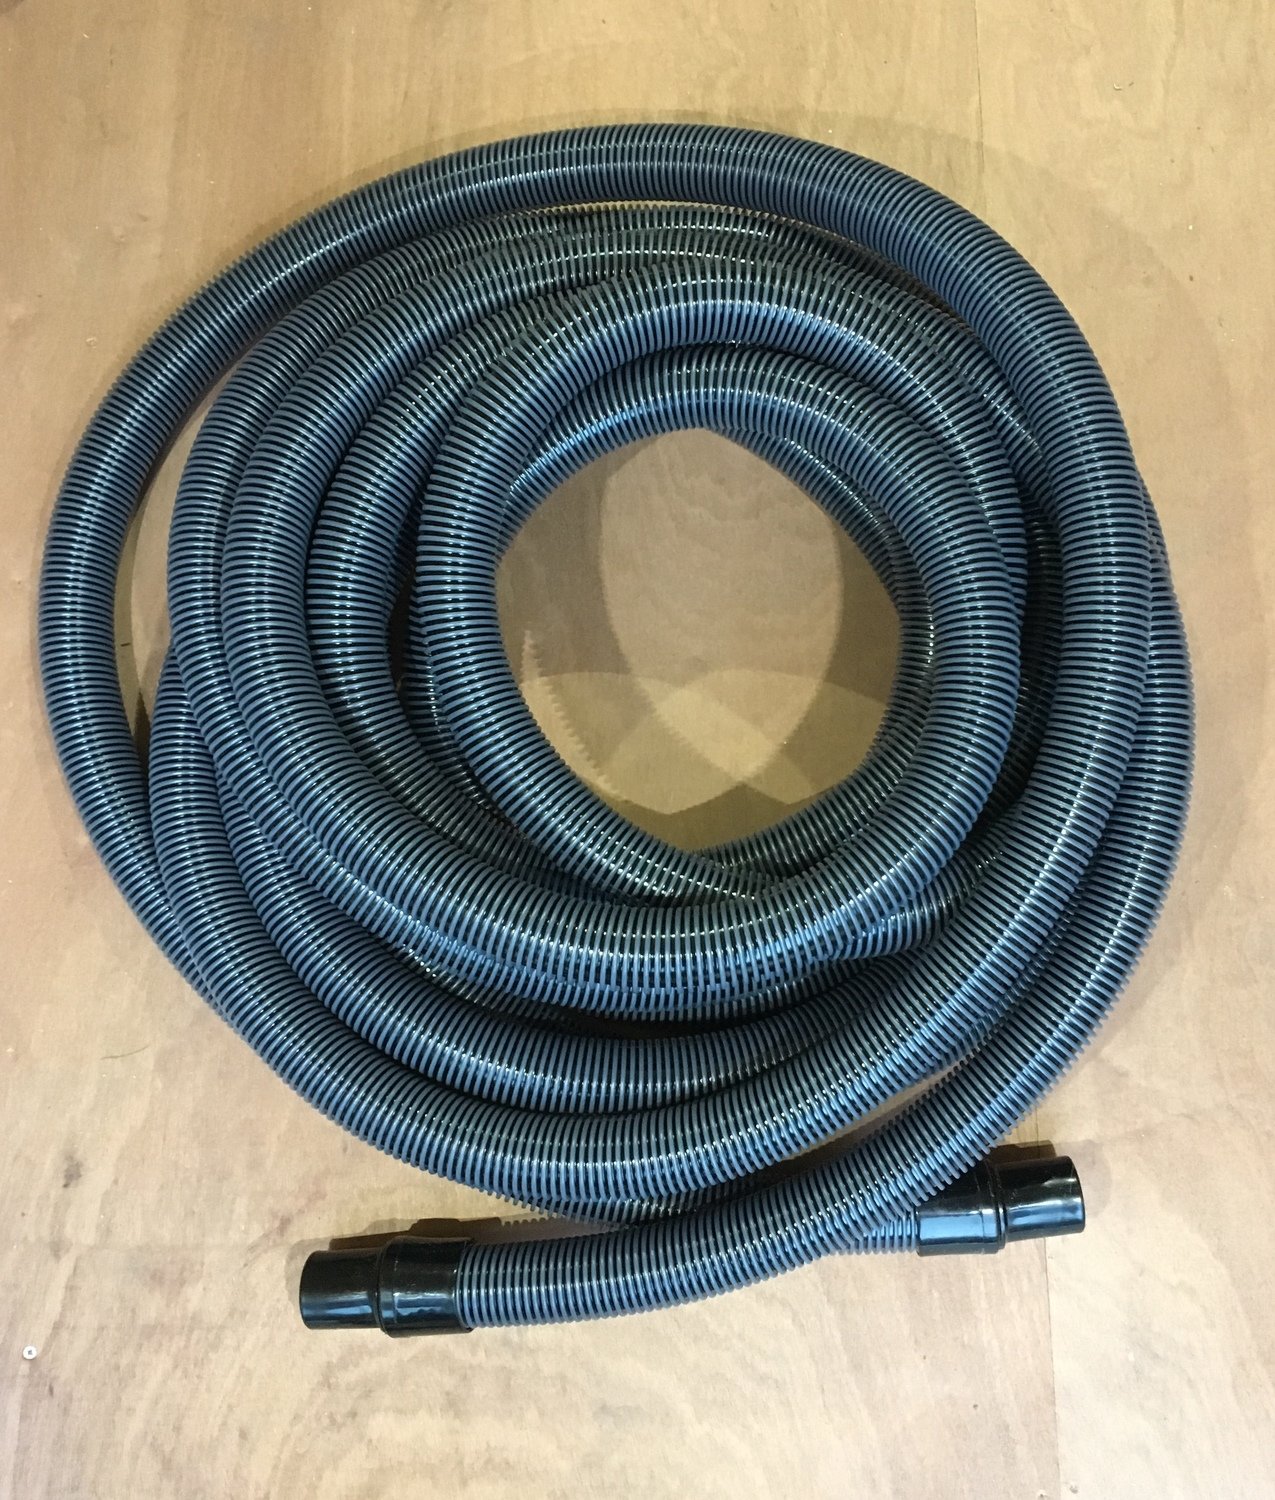 38MM X 15M Carpet Cleaning Vacuum Hose With Swivel Cuffs